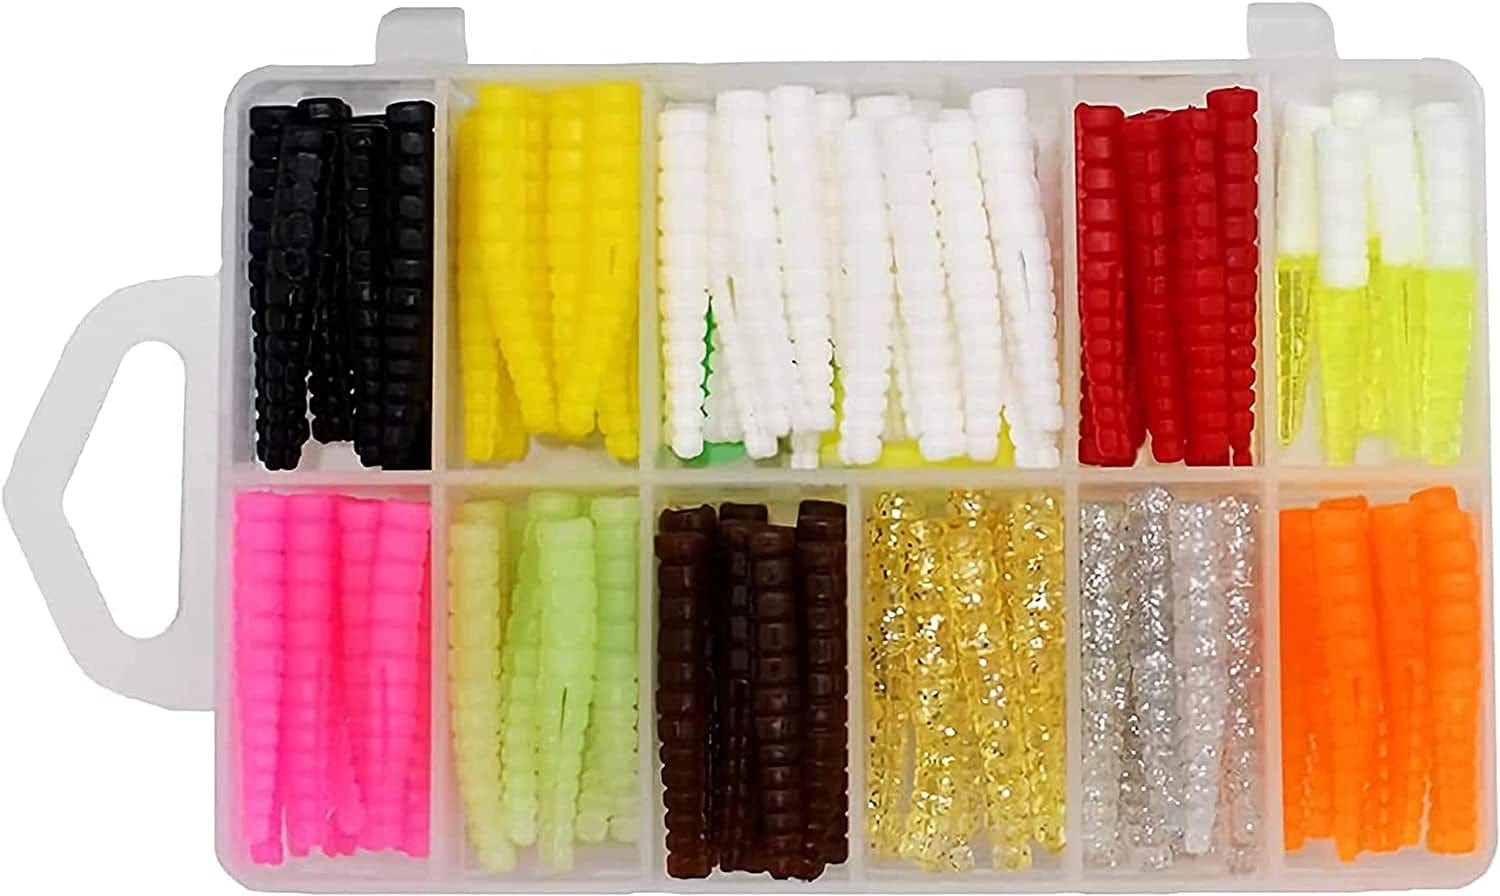 Trout Magnet Original 142 Piece Kit, Fishing Equipment and